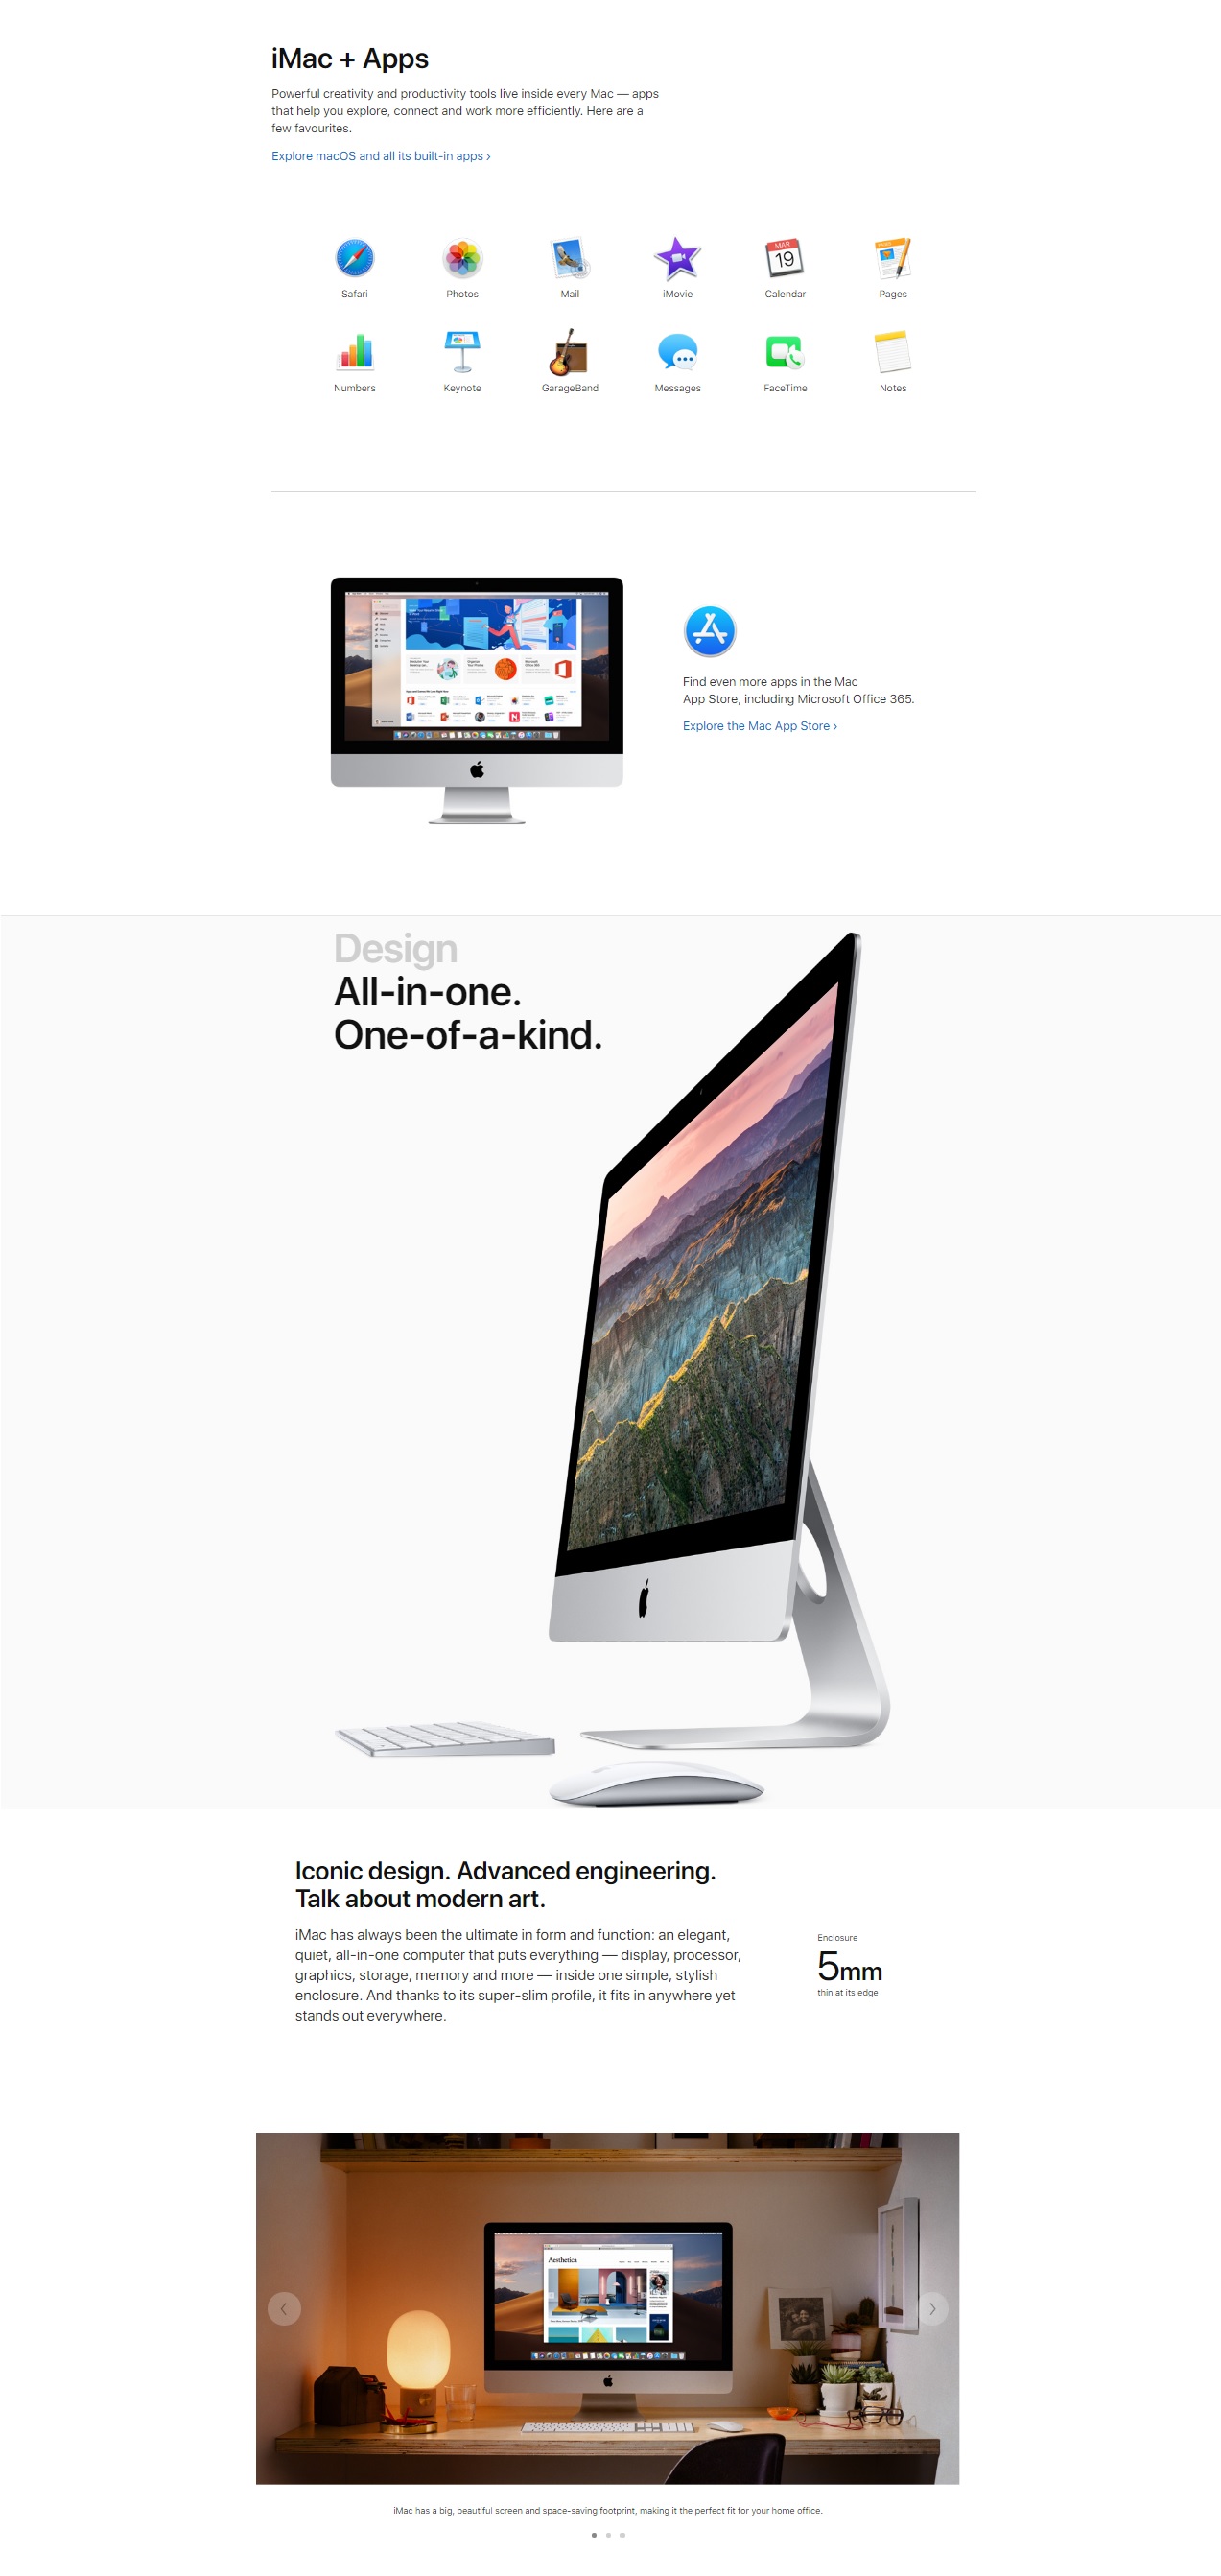 27-inch iMac Retina 5K Display 3.7GHz 6-Core Processor with Turbo Boost up to 4.6GHz ...